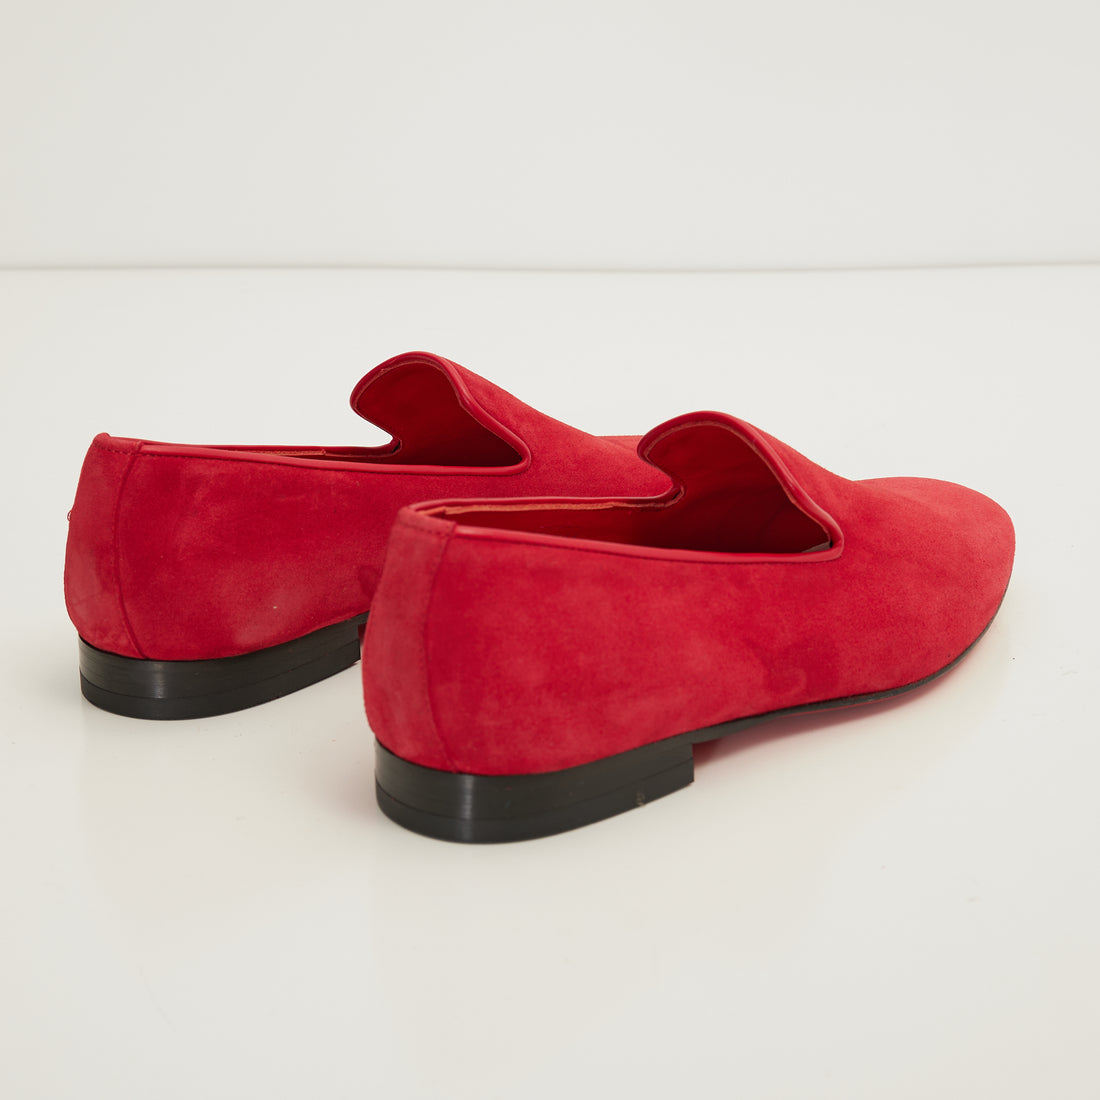 N° C9016 THE FORMAL LEATHER LOAFER - RED SUEDE